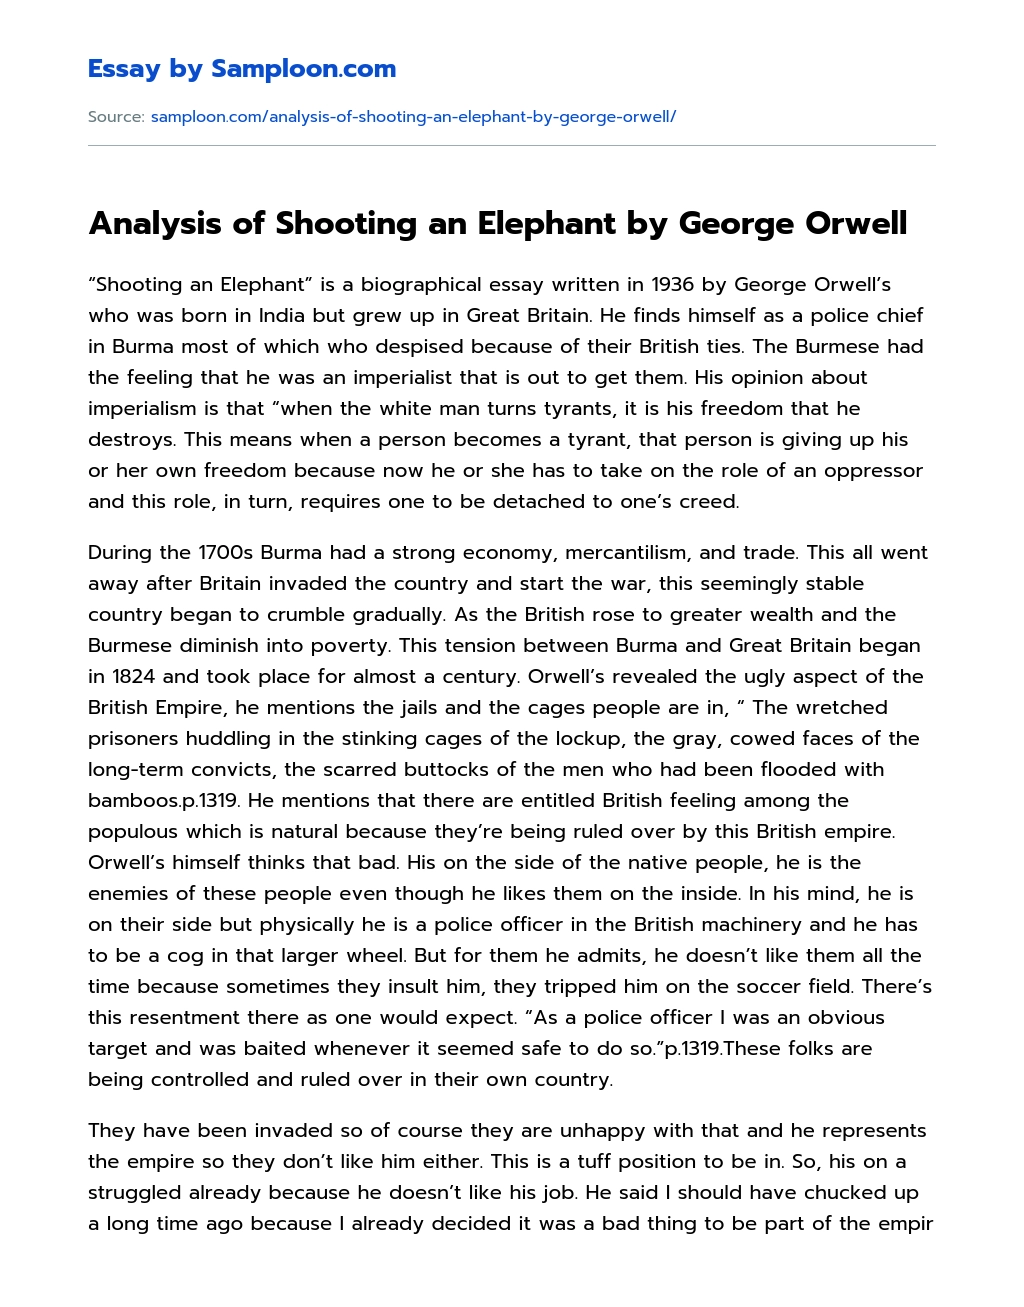 Analysis of Shooting an Elephant by George Orwell essay